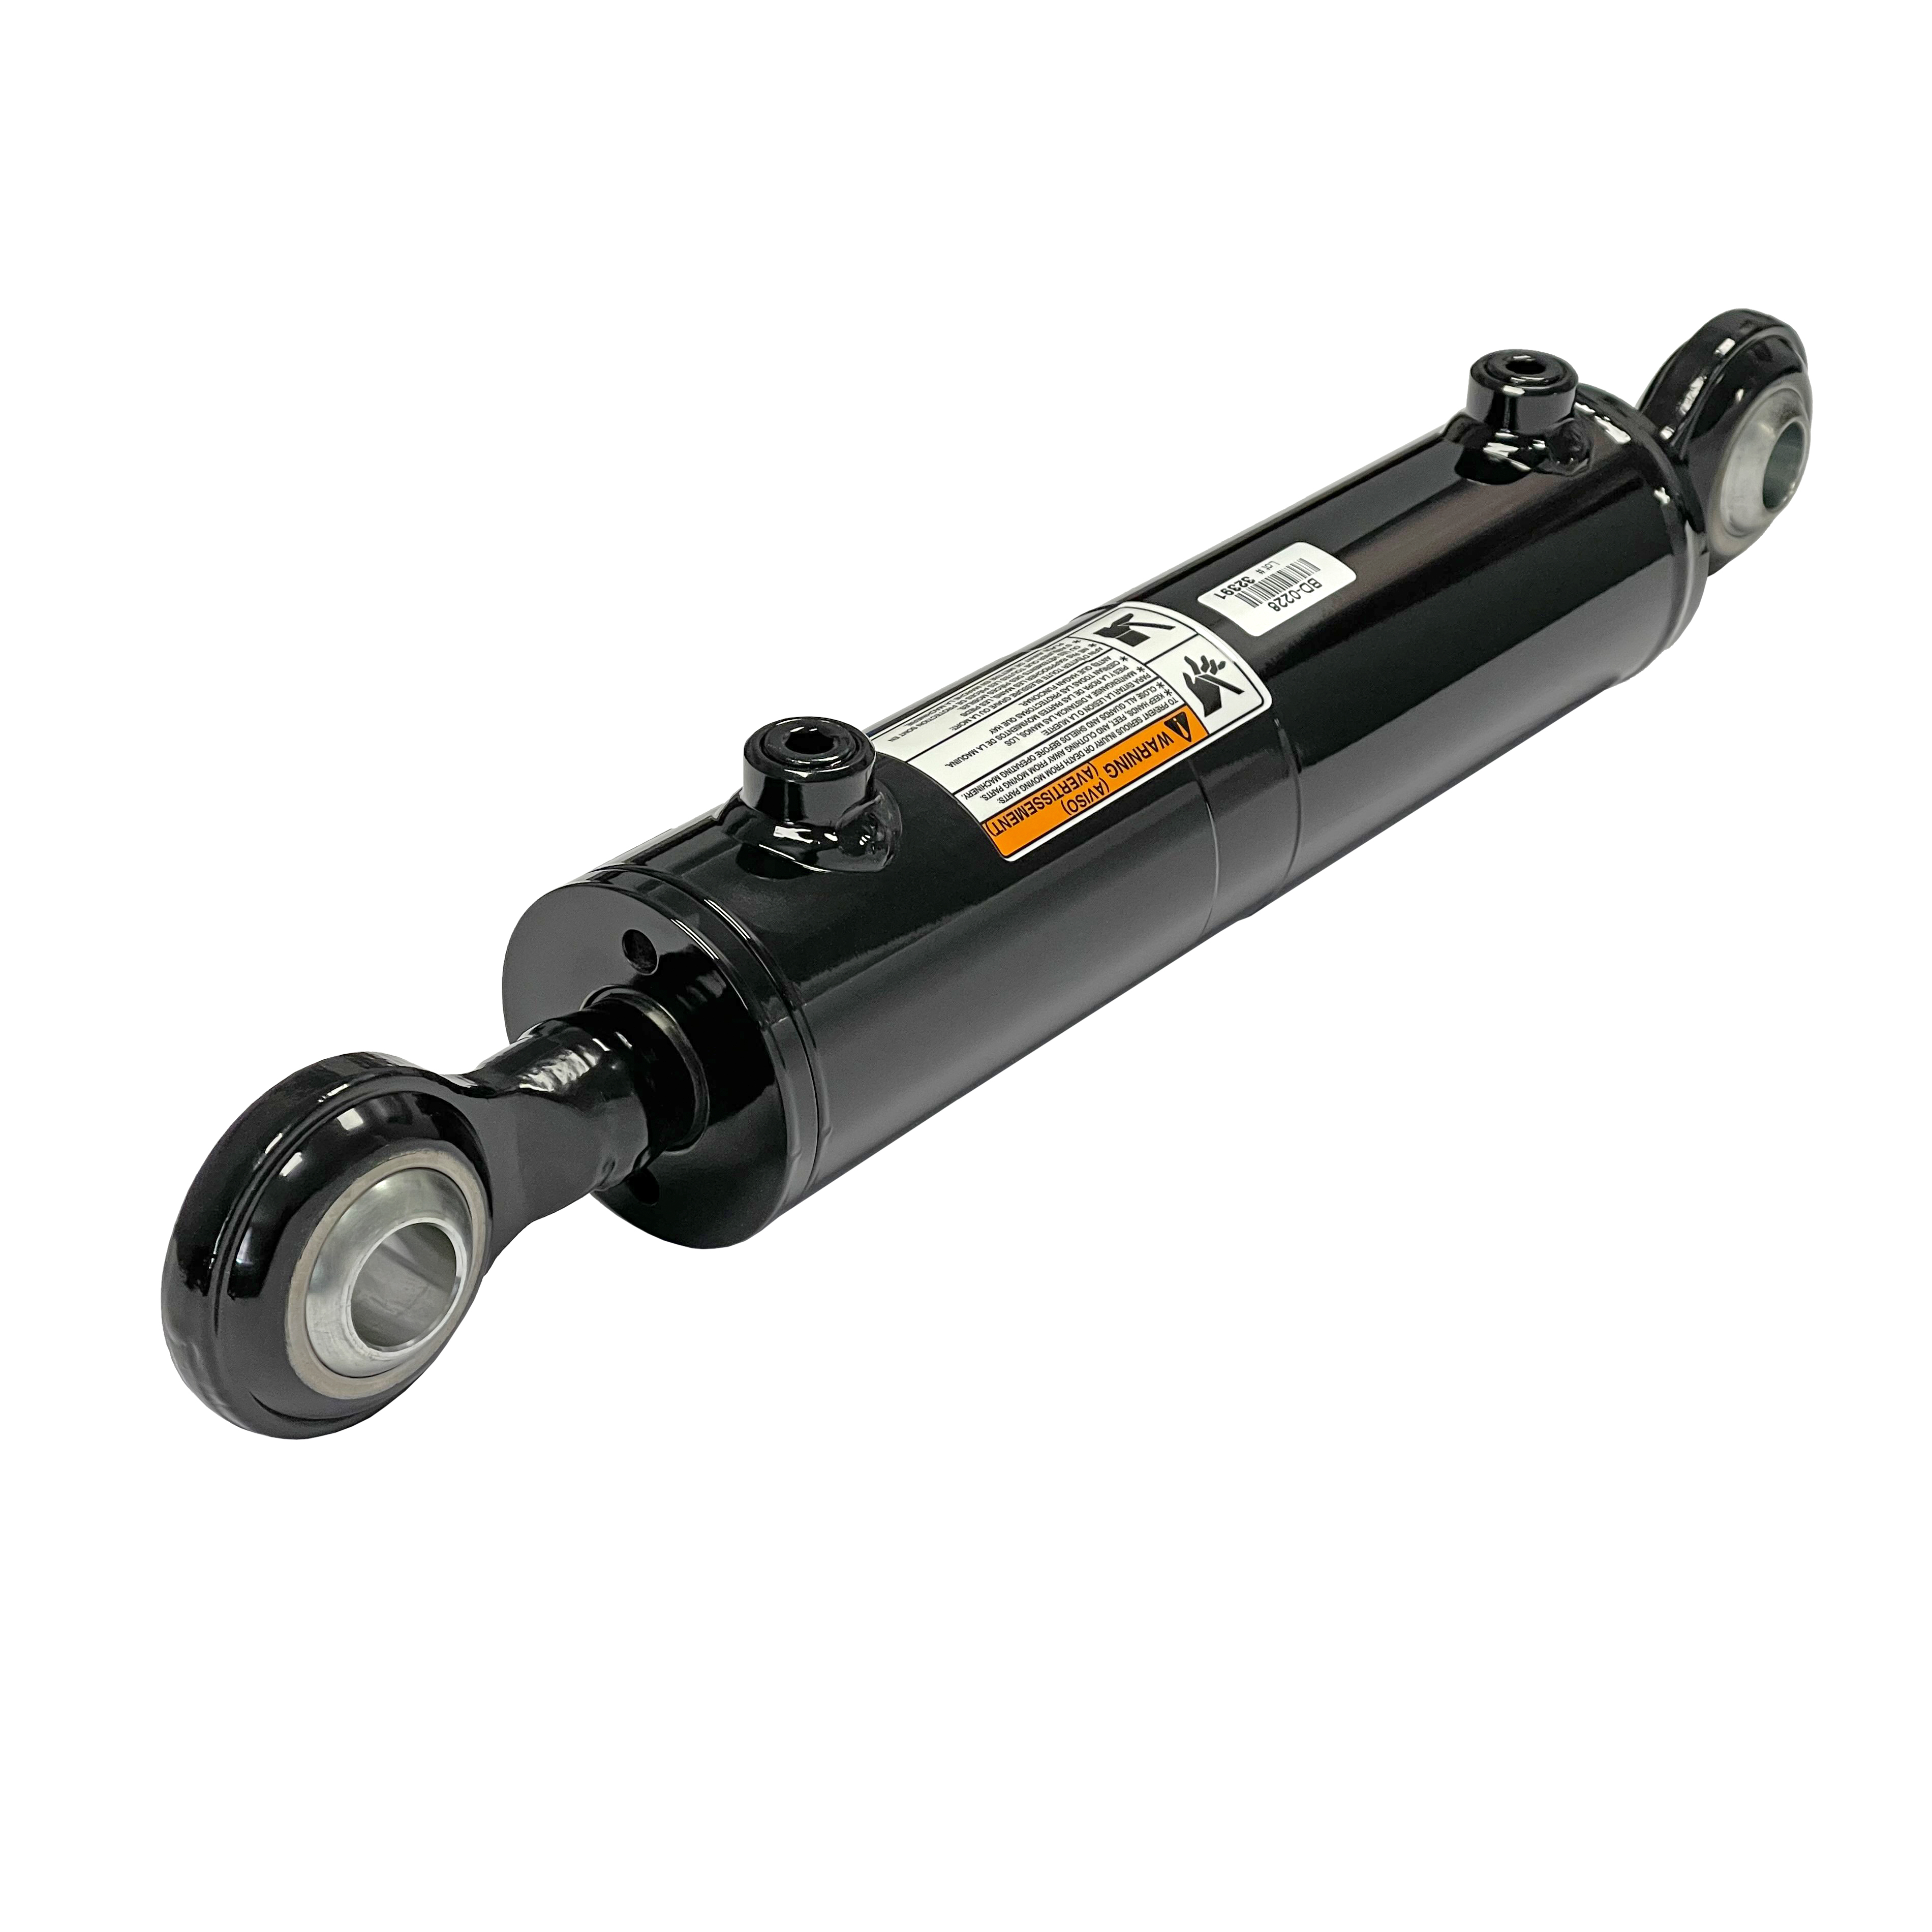 3 bore x 10 stroke toplink hydraulic cylinder, welded Top Link double acting cylinder | Prince Hydraulics